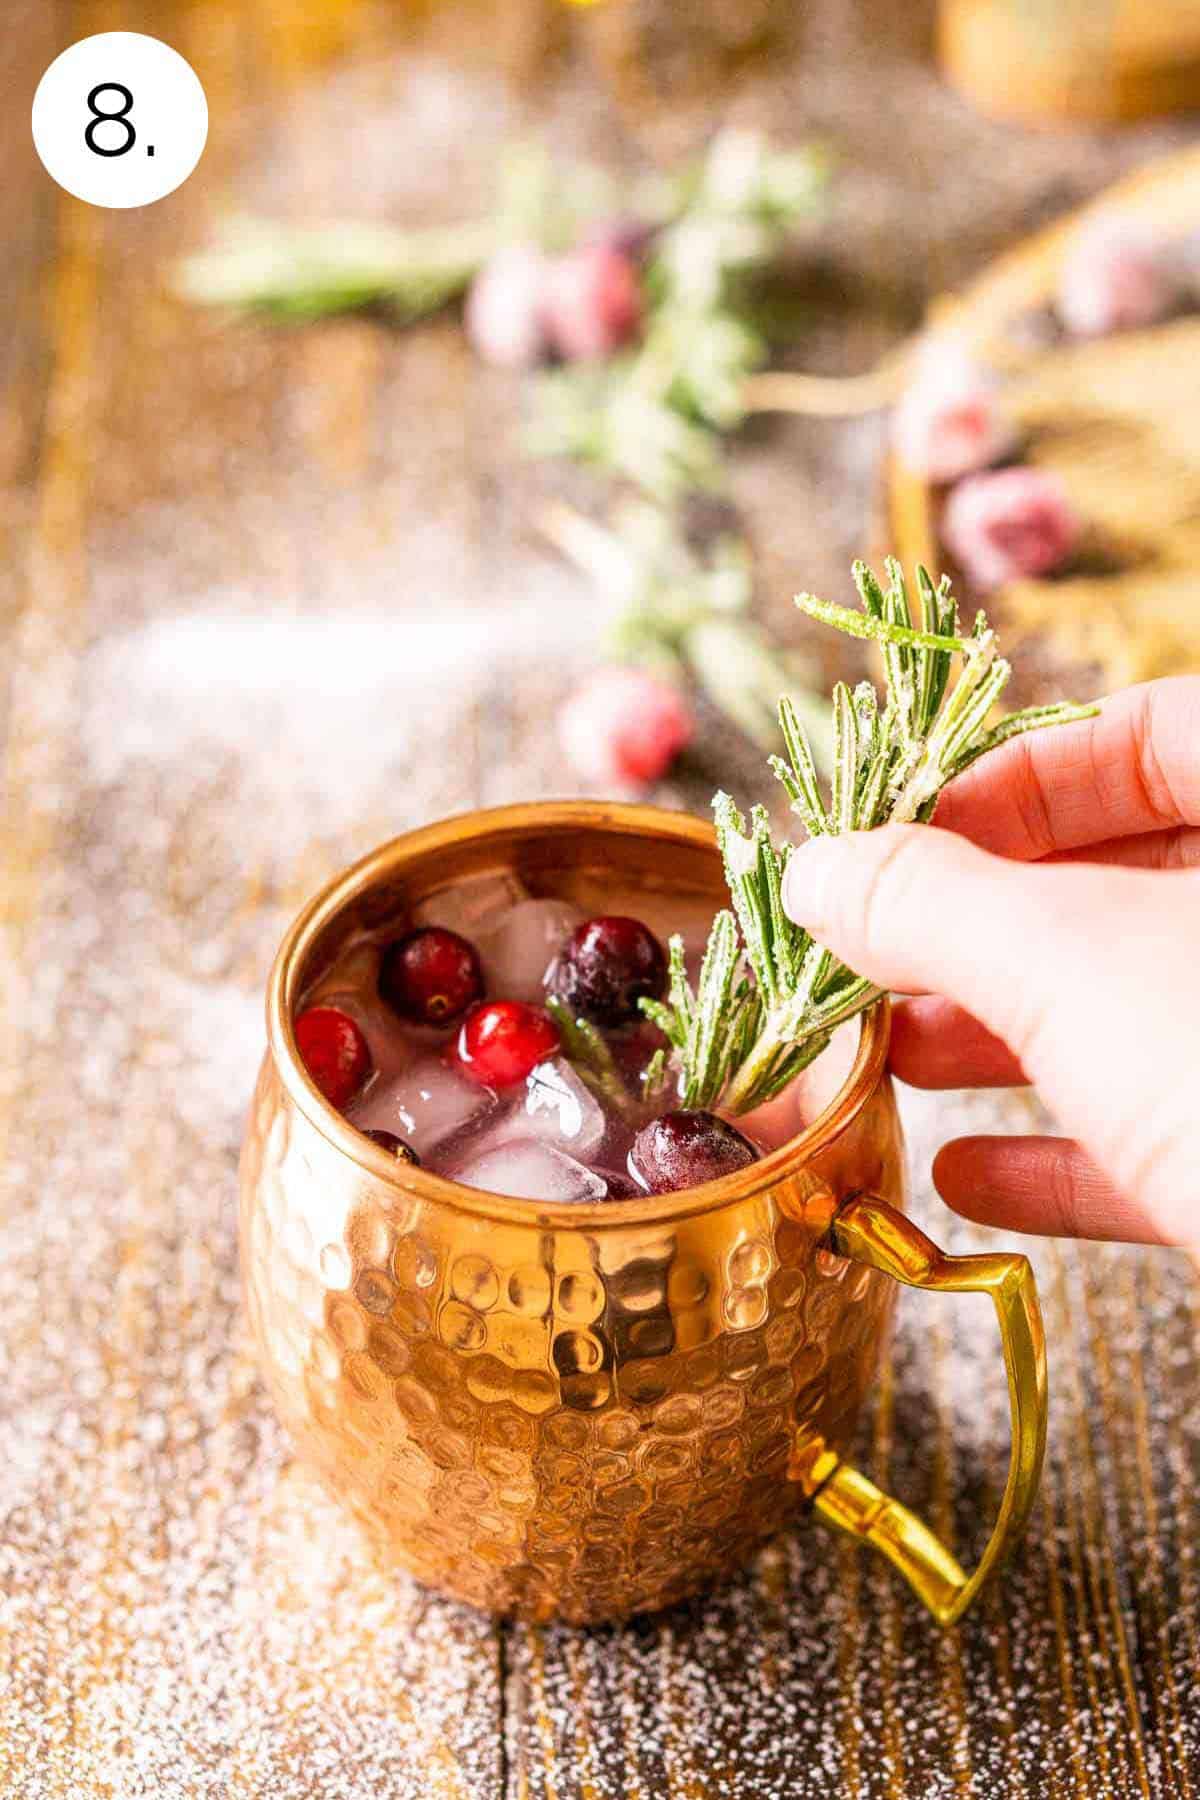 A hand placing a sugared rosemary sprig into the copper mug on a brown wooden surface.